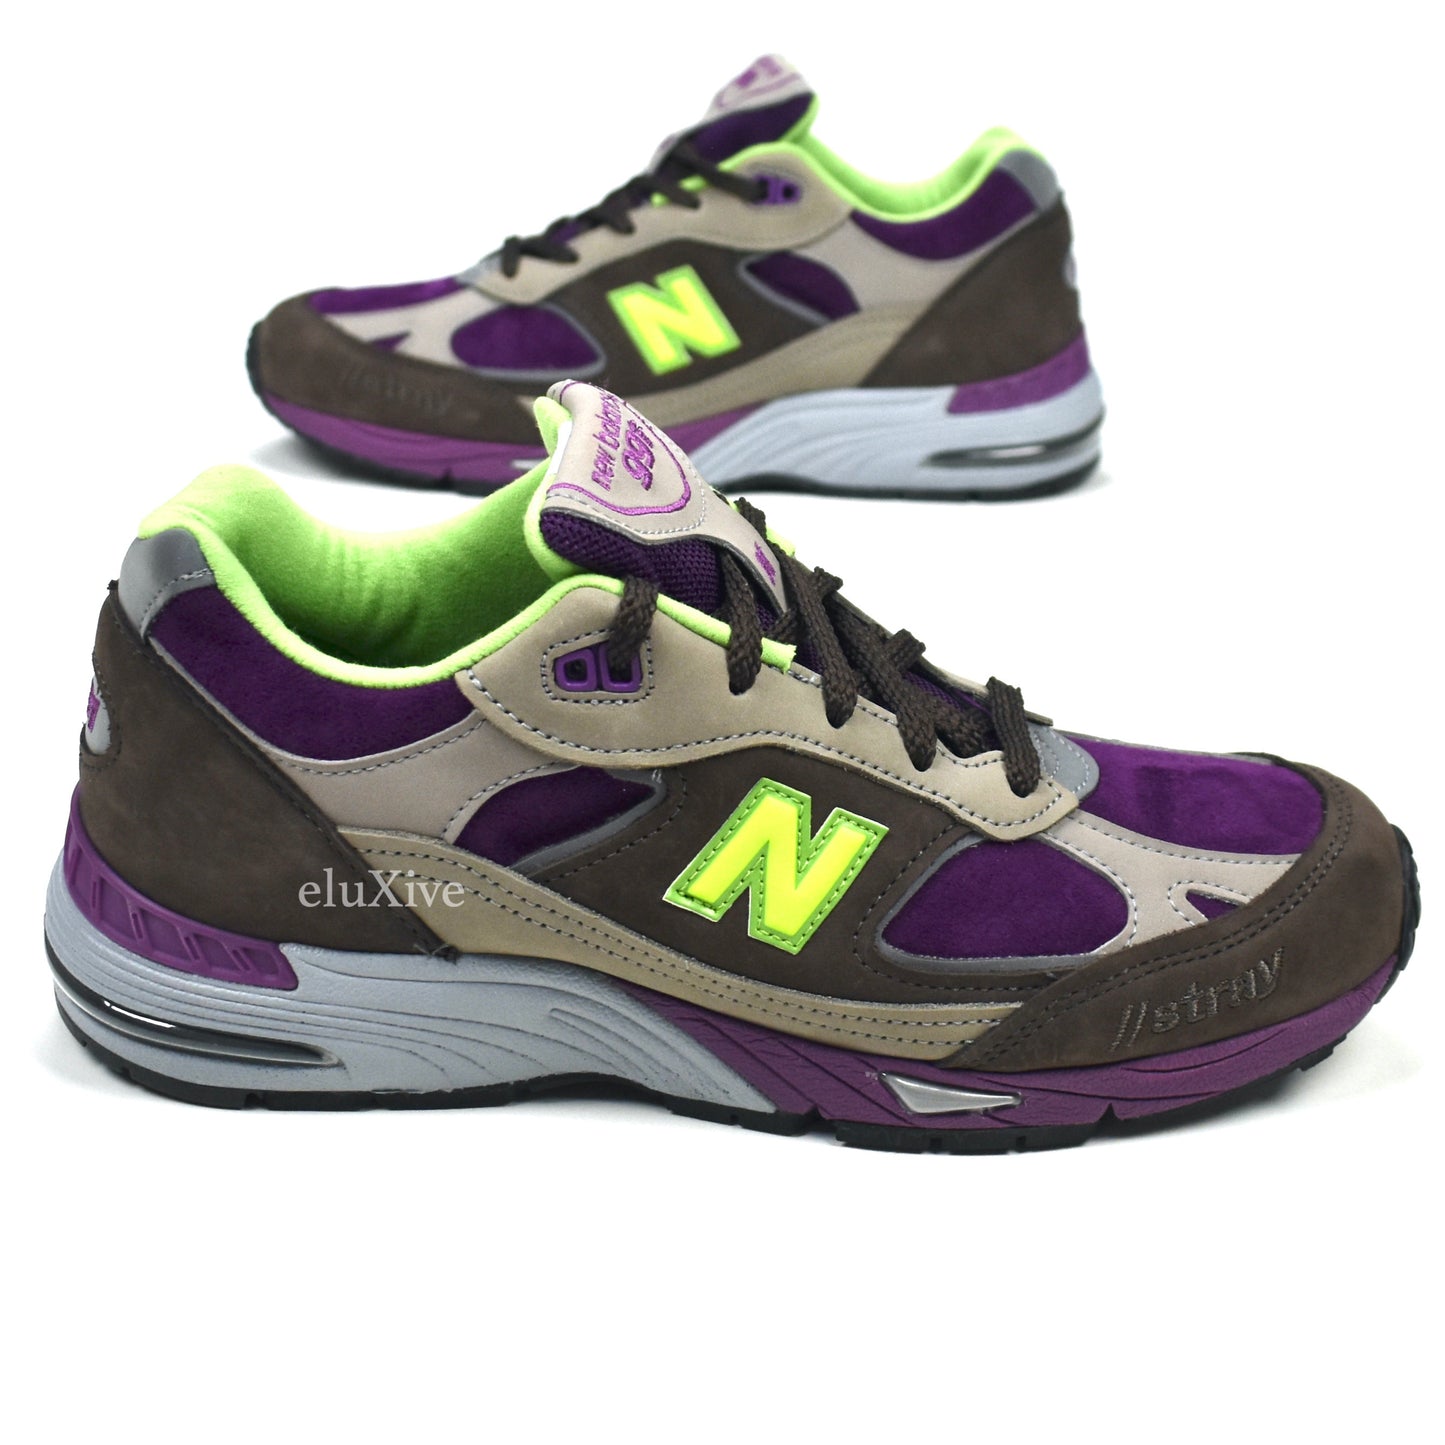 New Balance x Stray Rats - 991 Made in UK Sneakers (Purple/Brown)